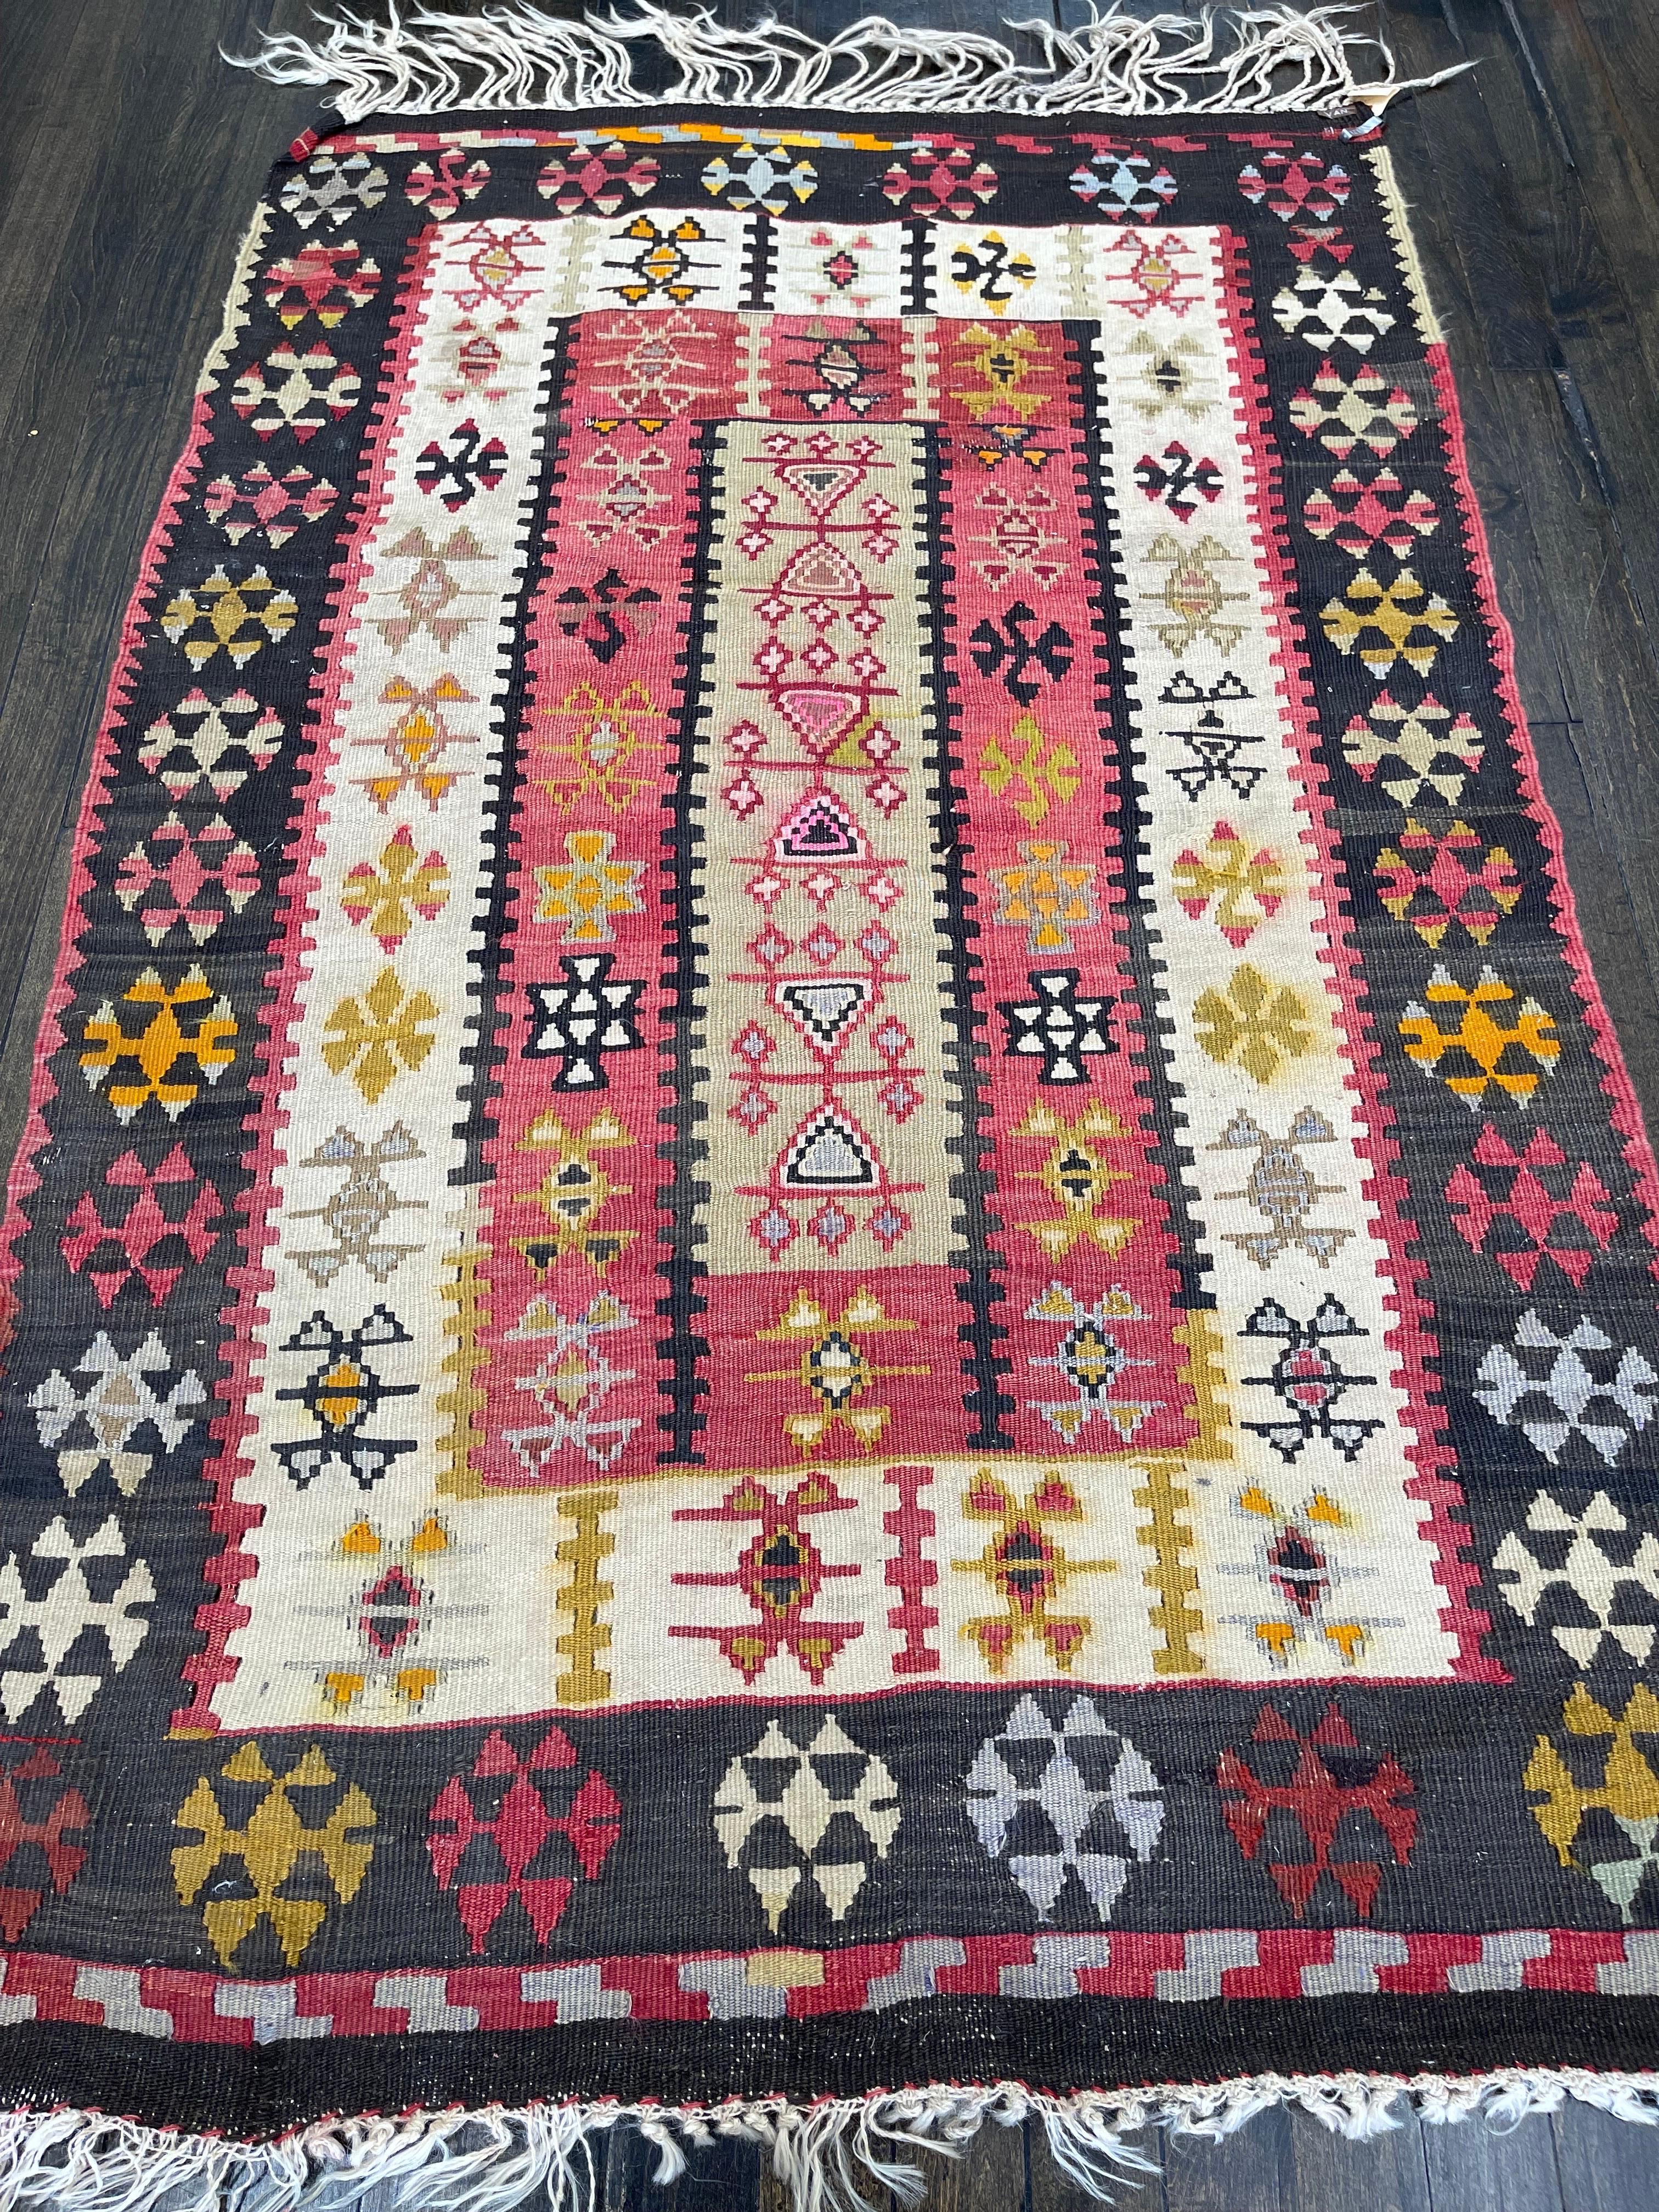 A Fabulous flat weave, this klim was hand woven in the town of Van, one of major areas of klim making in Turkey. Pattern consists of three rectangles decorated by rows of rosettes and other ornaments and the whole rug is framed by a graceful black